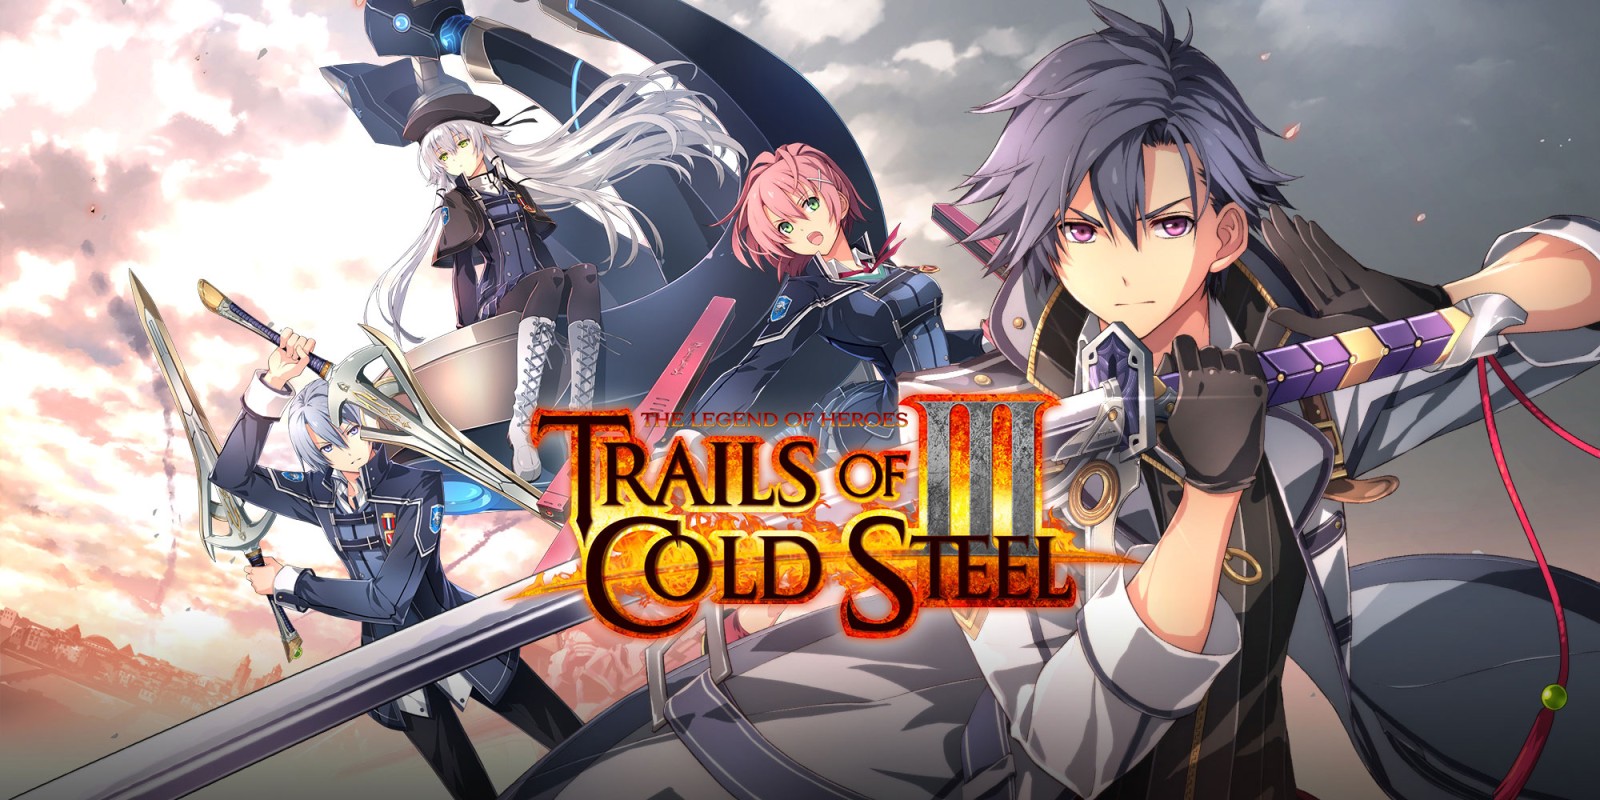 Of the heroes steel cold of legend trails Save 30%